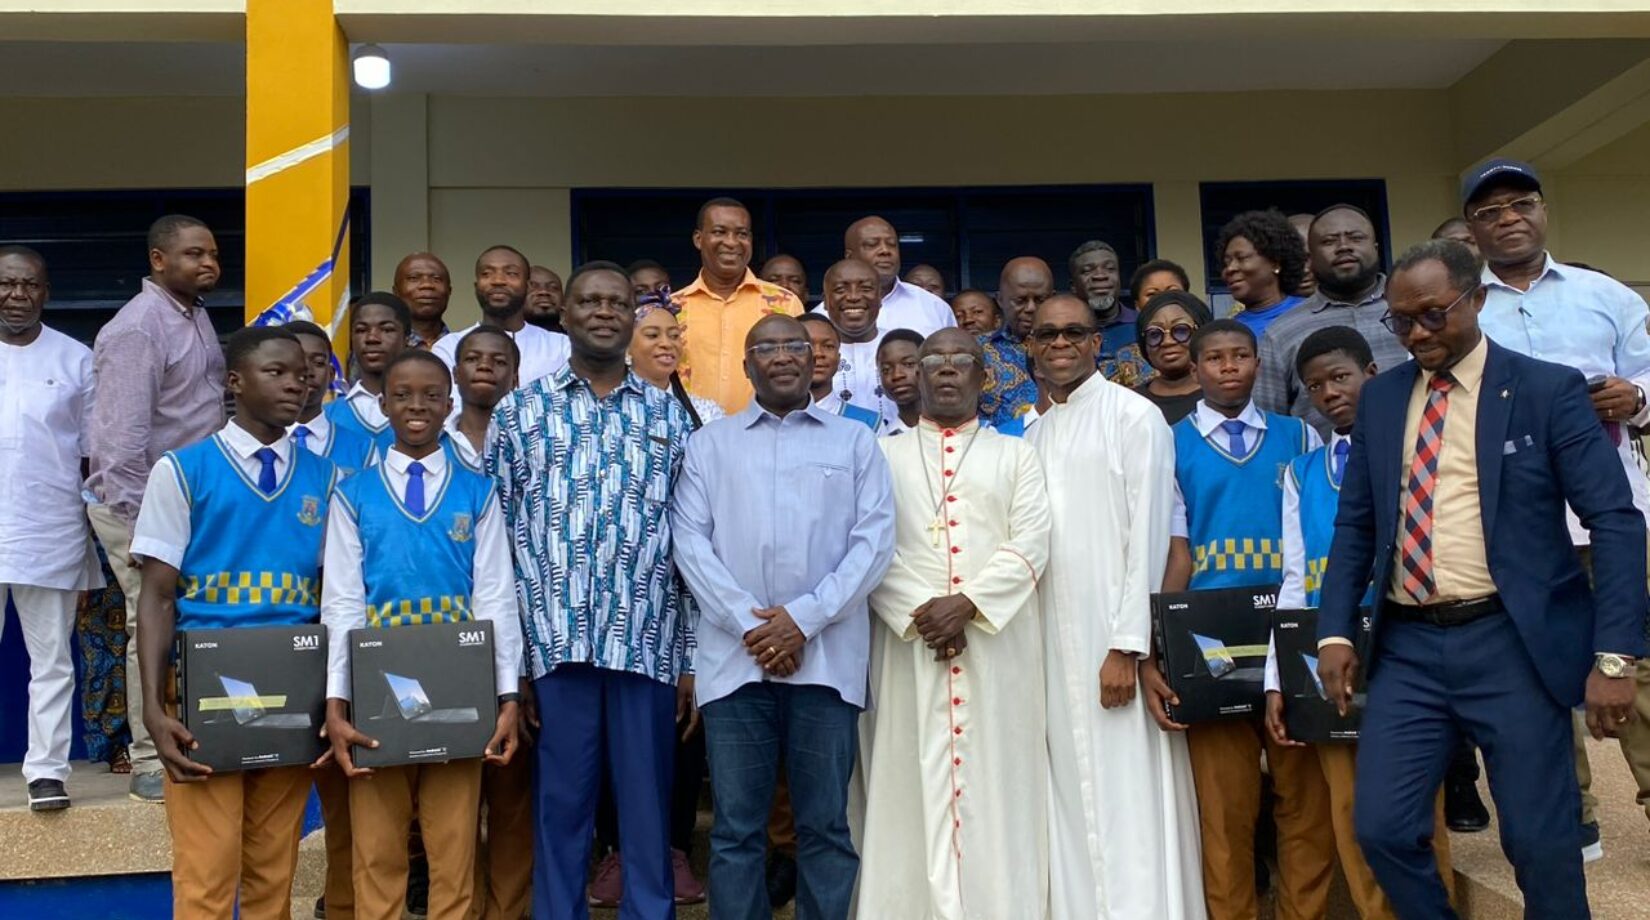 Dr Bawumia presents tablets to Opoku Ware students